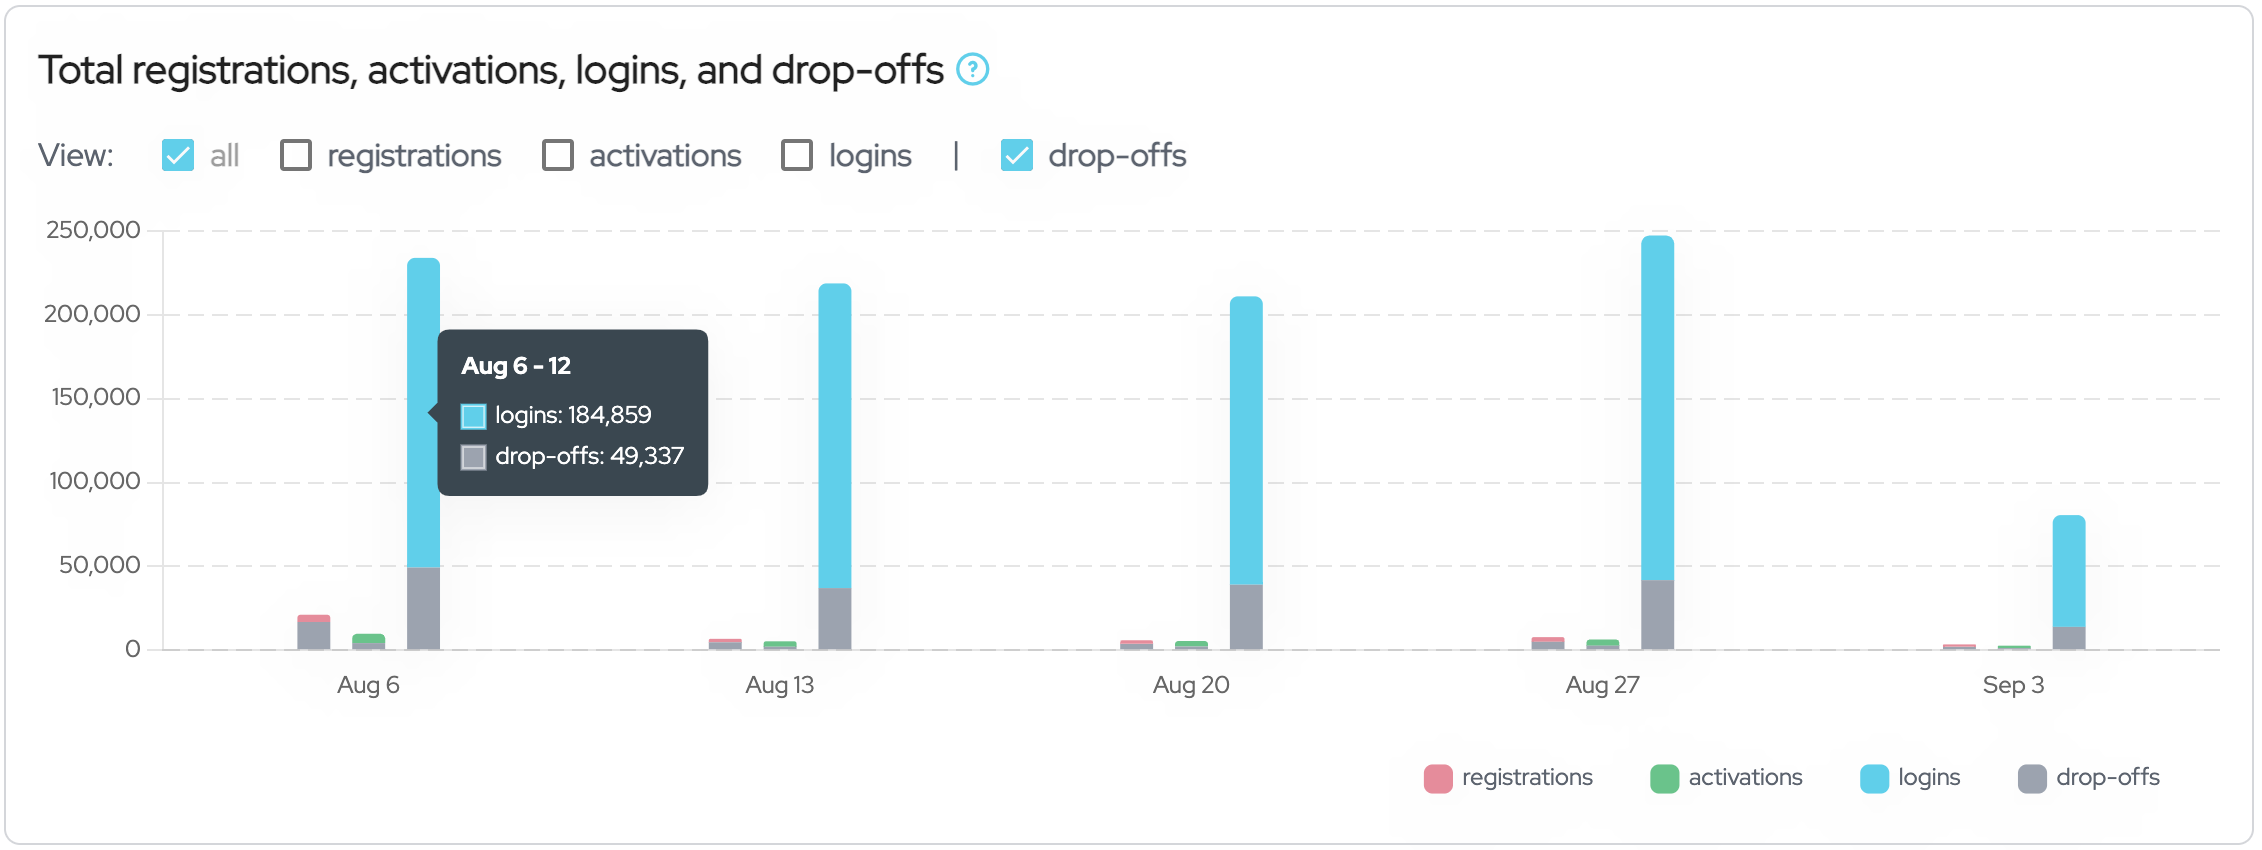 The Total registrations, activations, logins, and drop-offs graph.